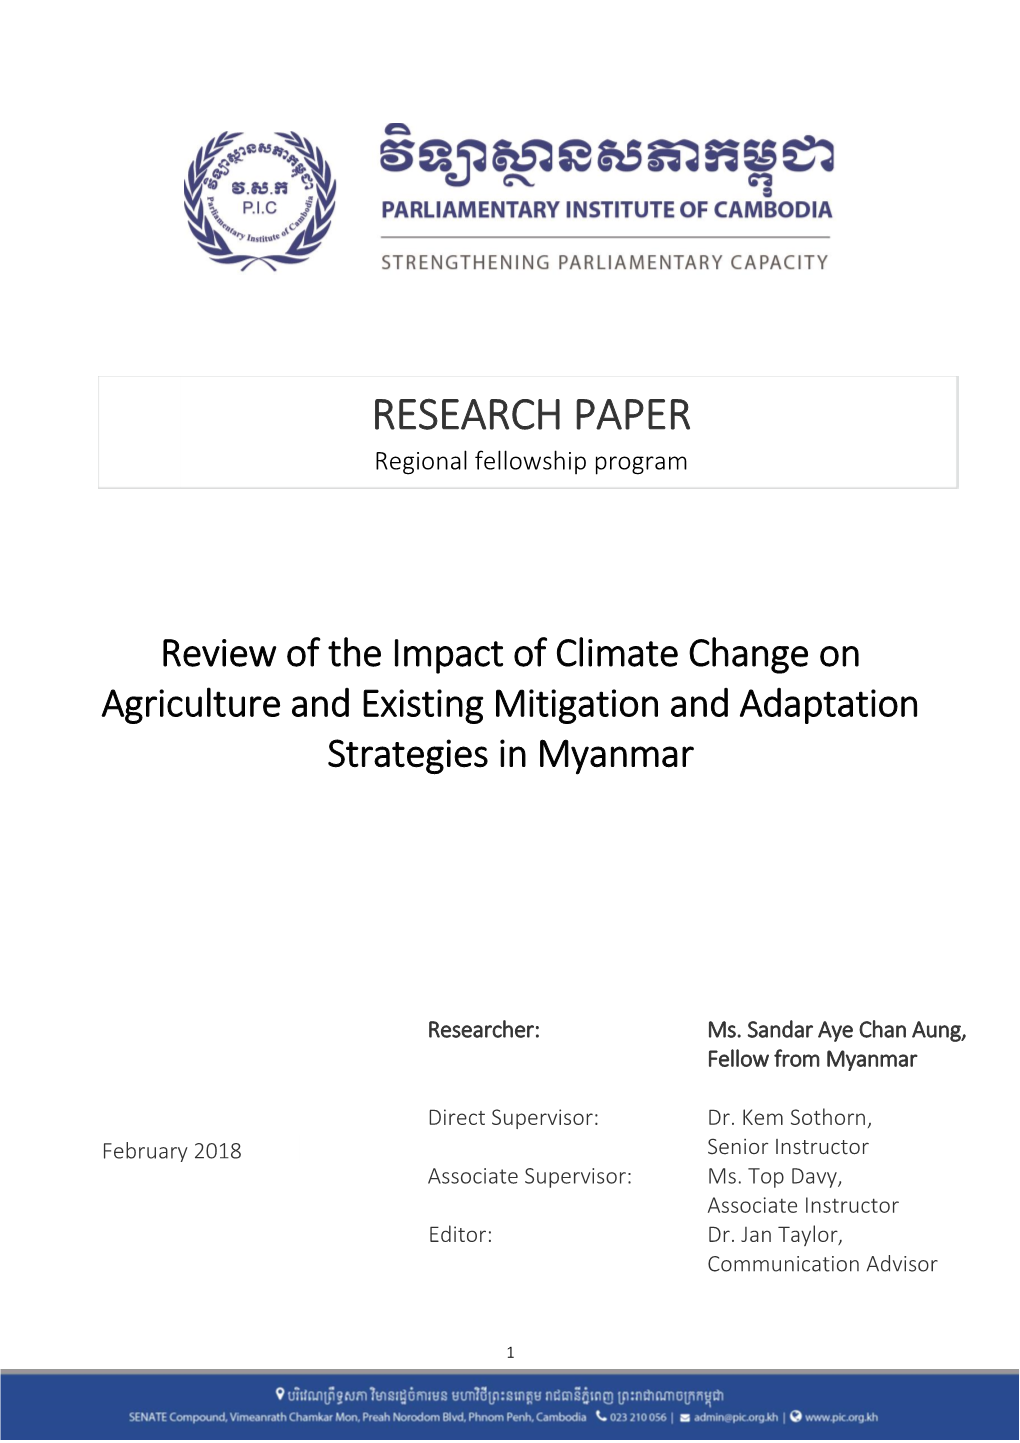 Review of the Impact of Climate Change on Agriculture and Existing Mitigation and Adaptation Strategies in Myanmar